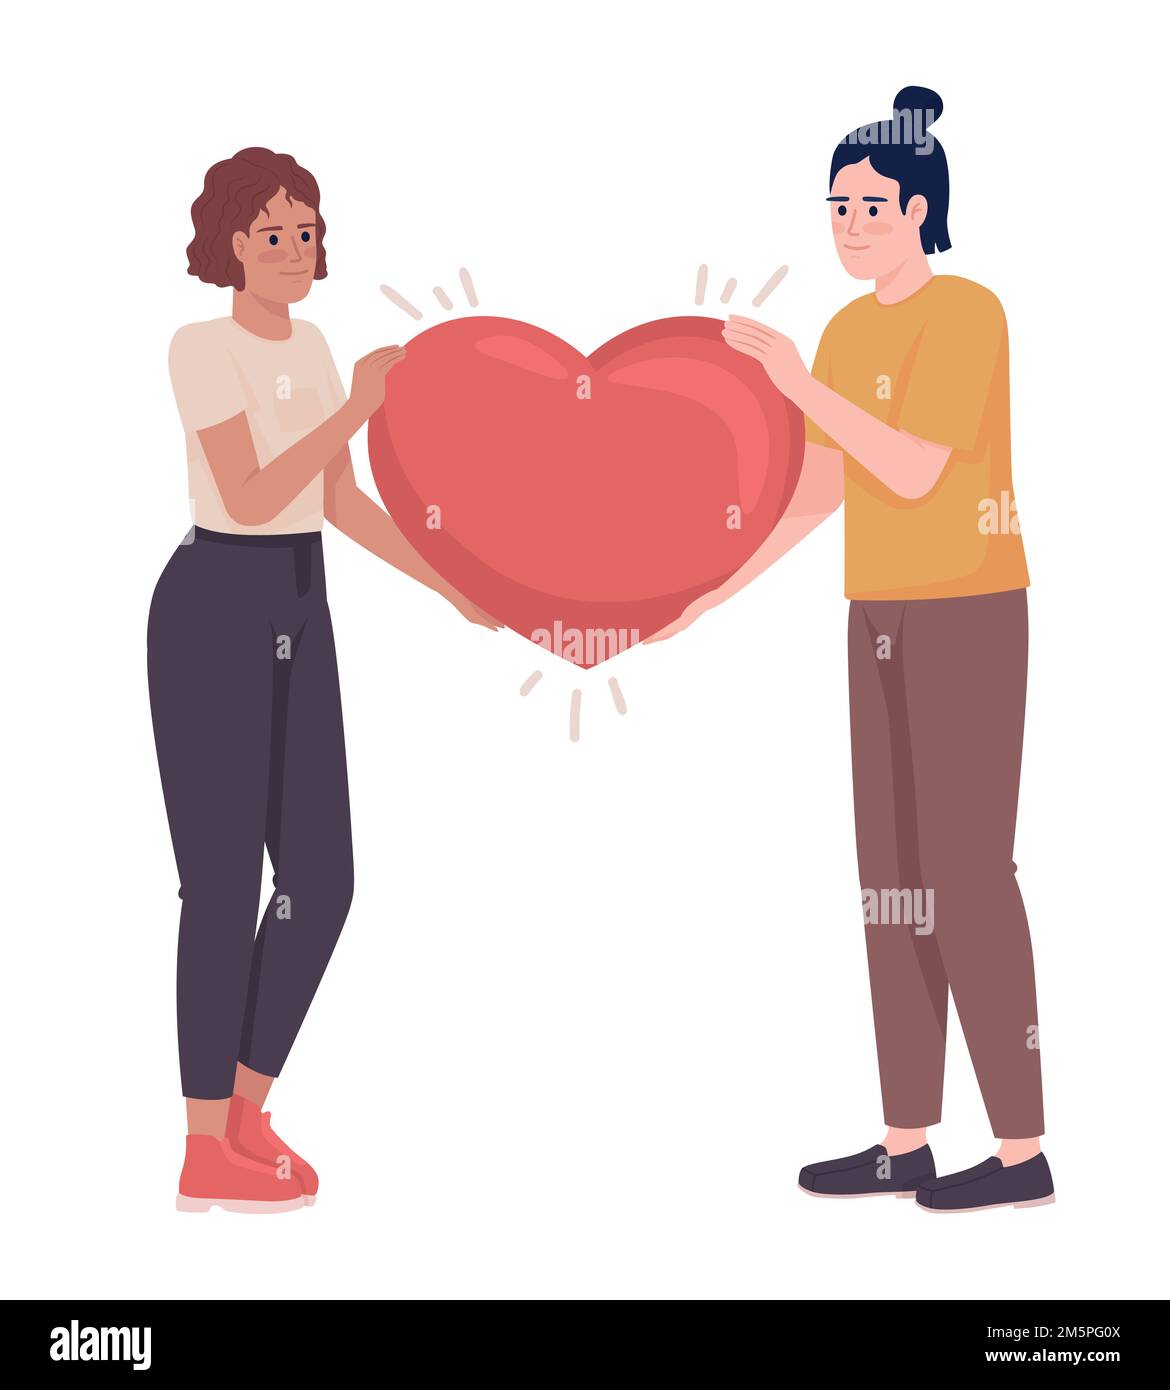 Supportive relationship semi flat color vector characters Stock Vector